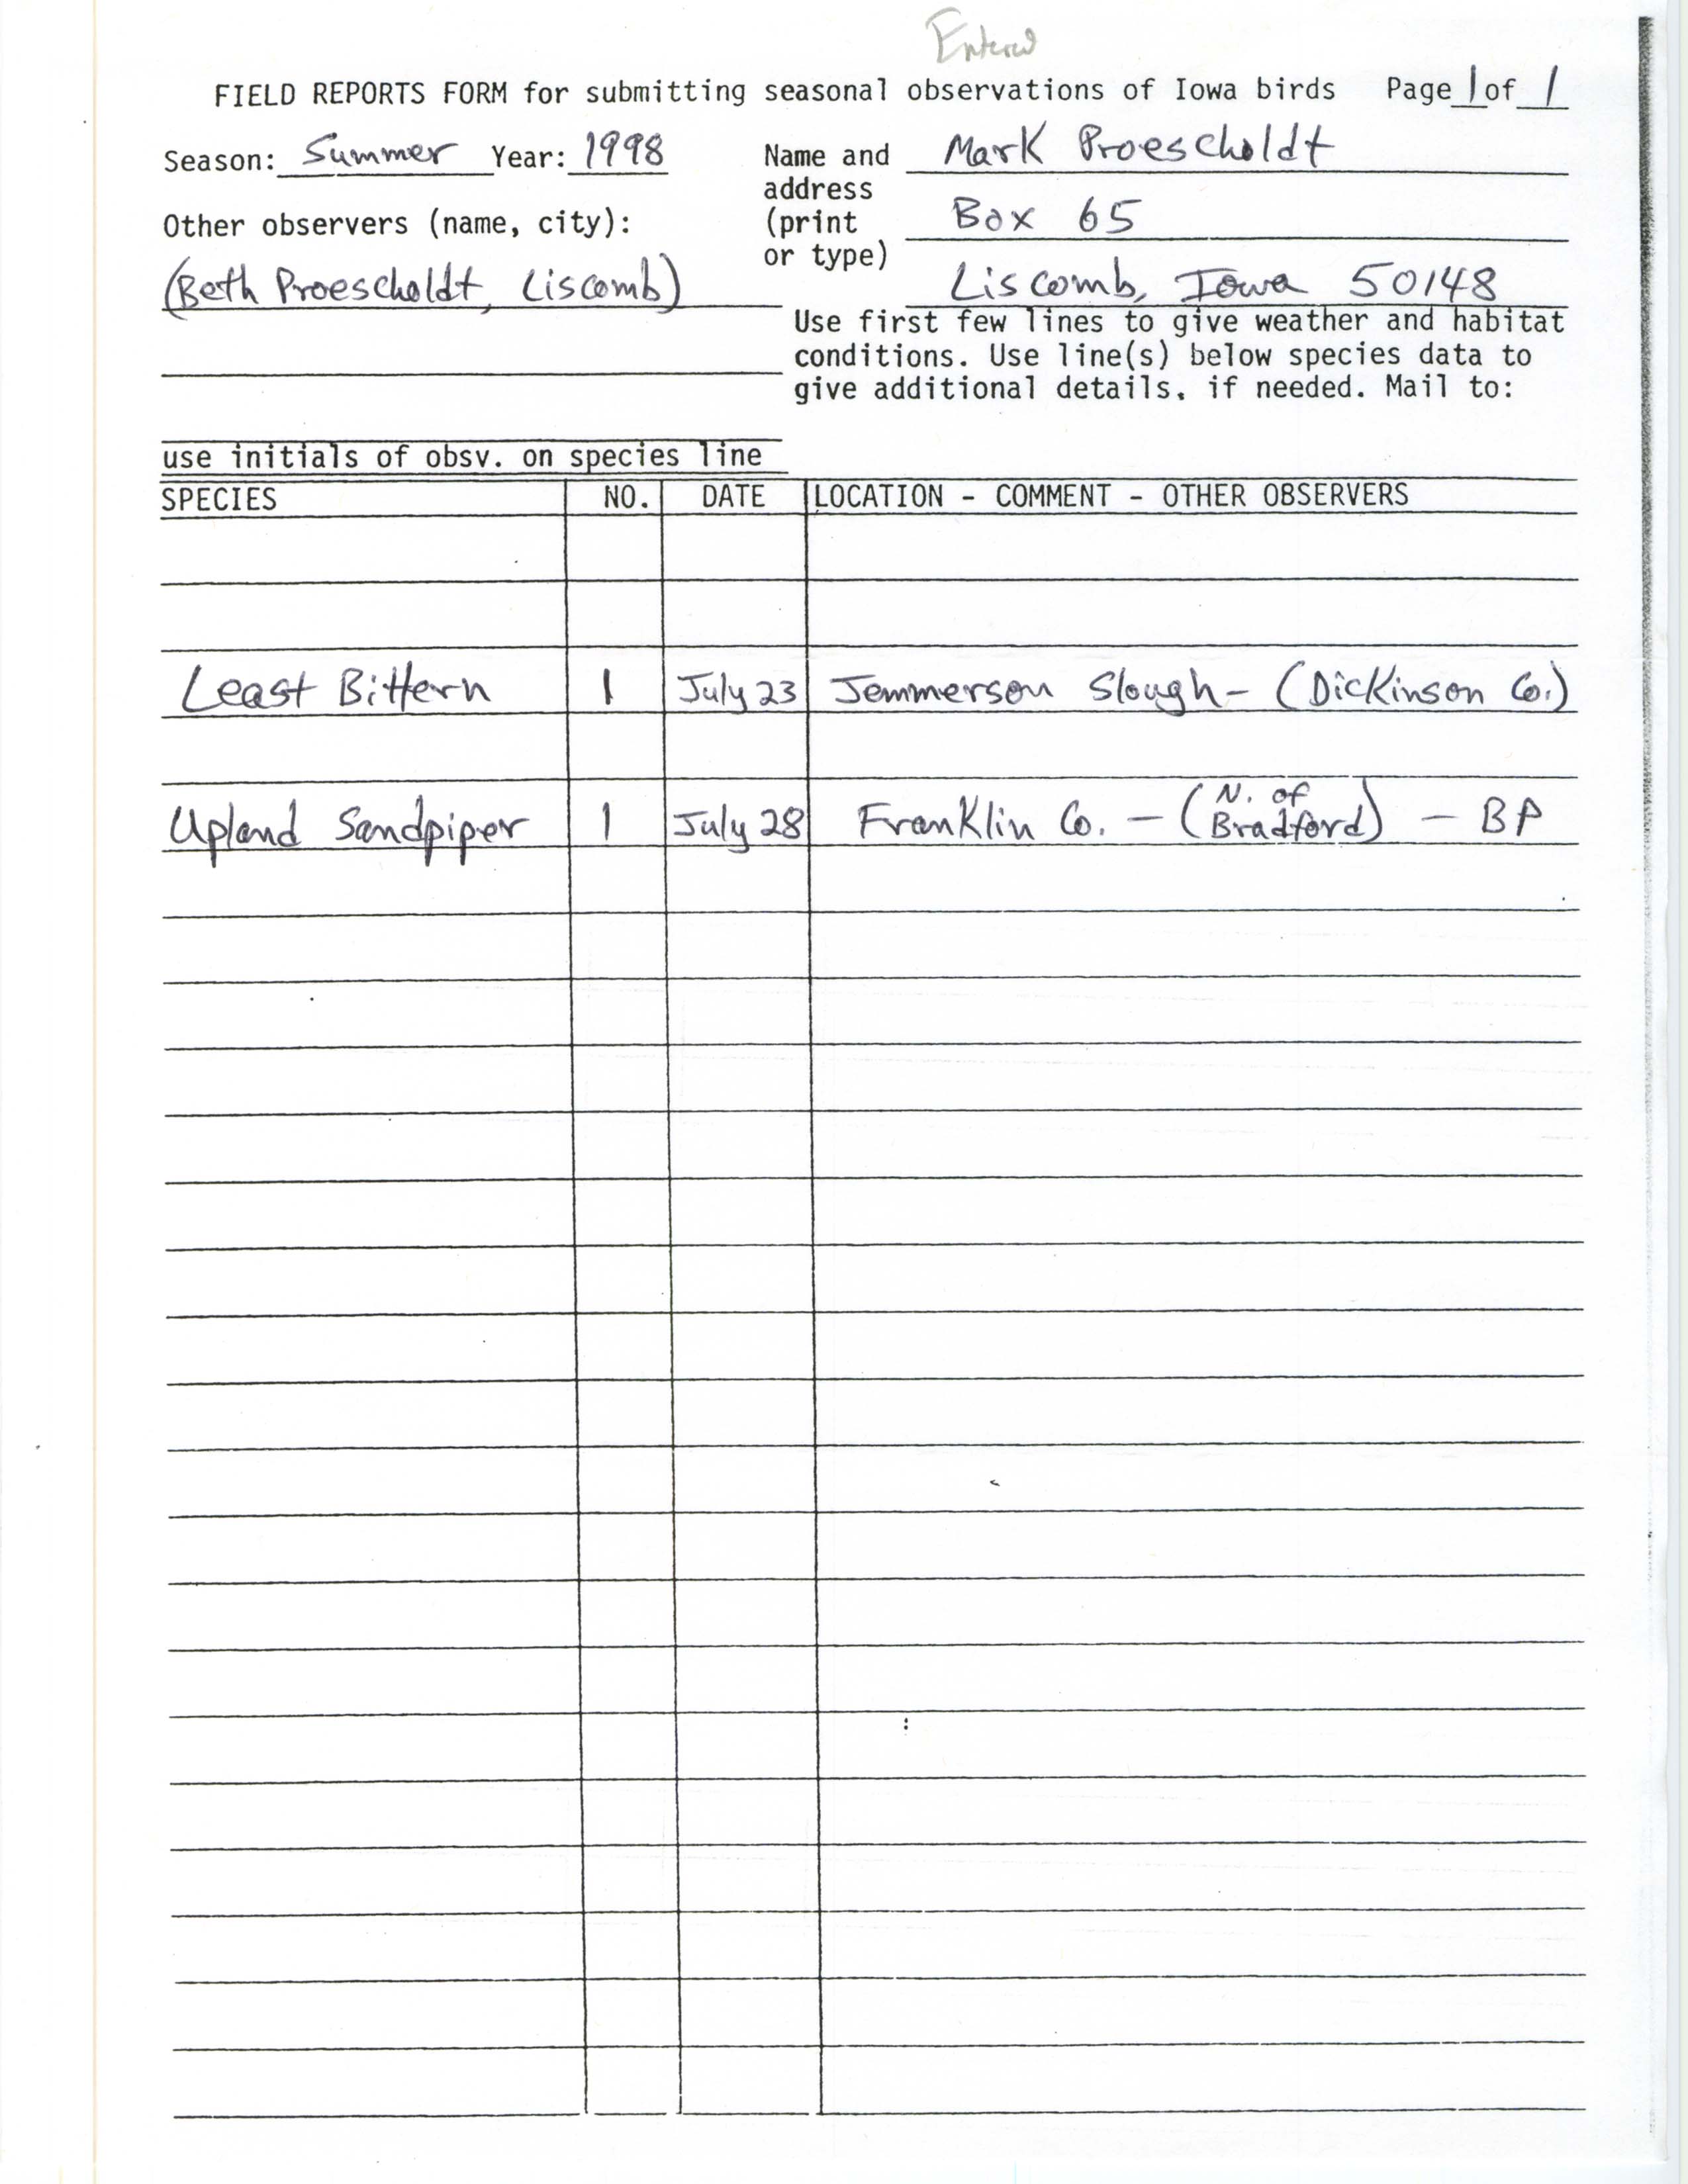 Field reports form for submitting seasonal observations of Iowa birds, Mark & Beth Proescholdt, summer 1998